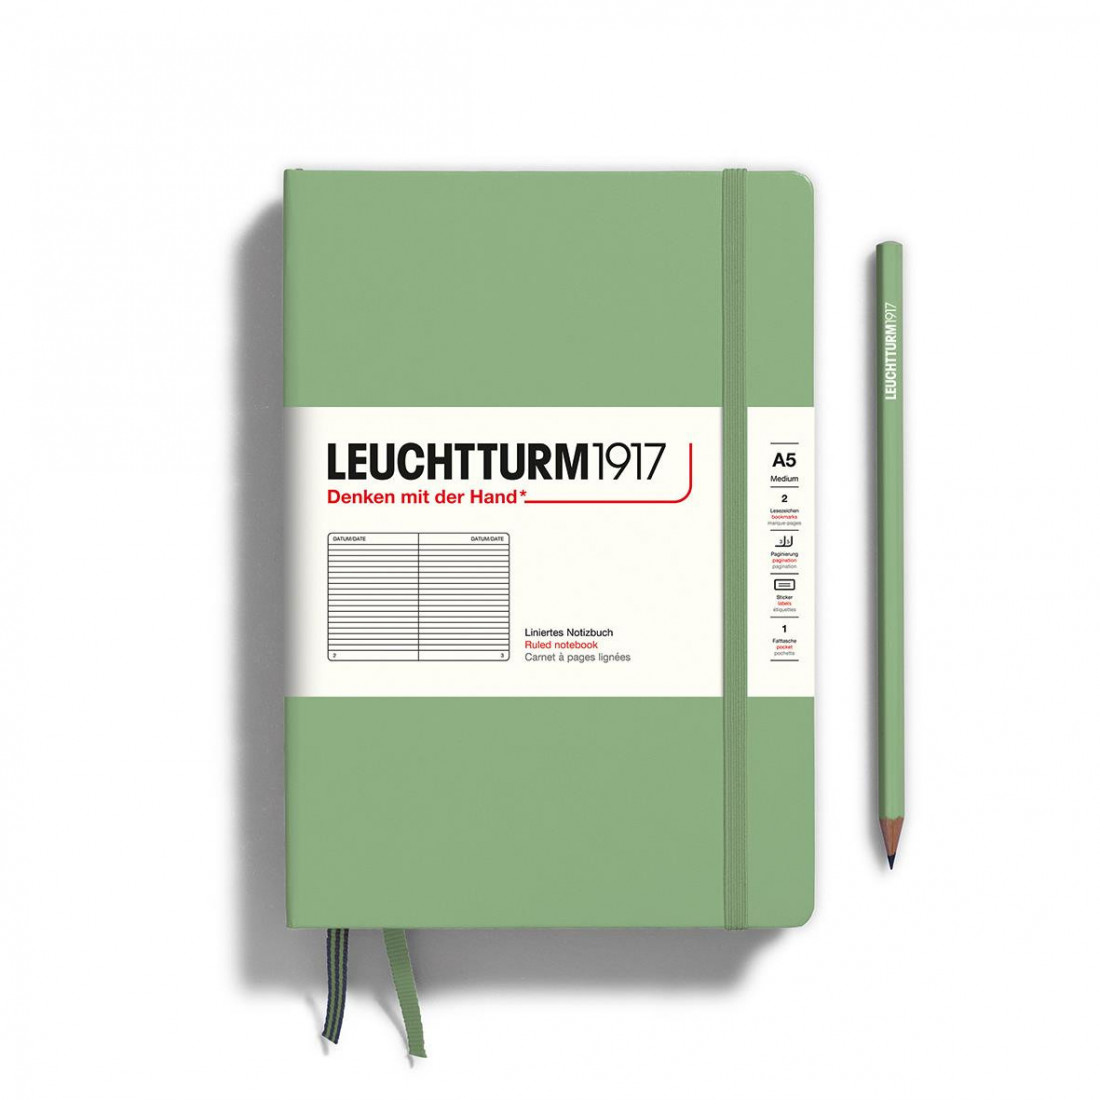 LEUCHTTURM1917 Metallic Special Edition - Medium A5 Dotted Hardcover  Notebook (Gold) - 251 Numbered Pages